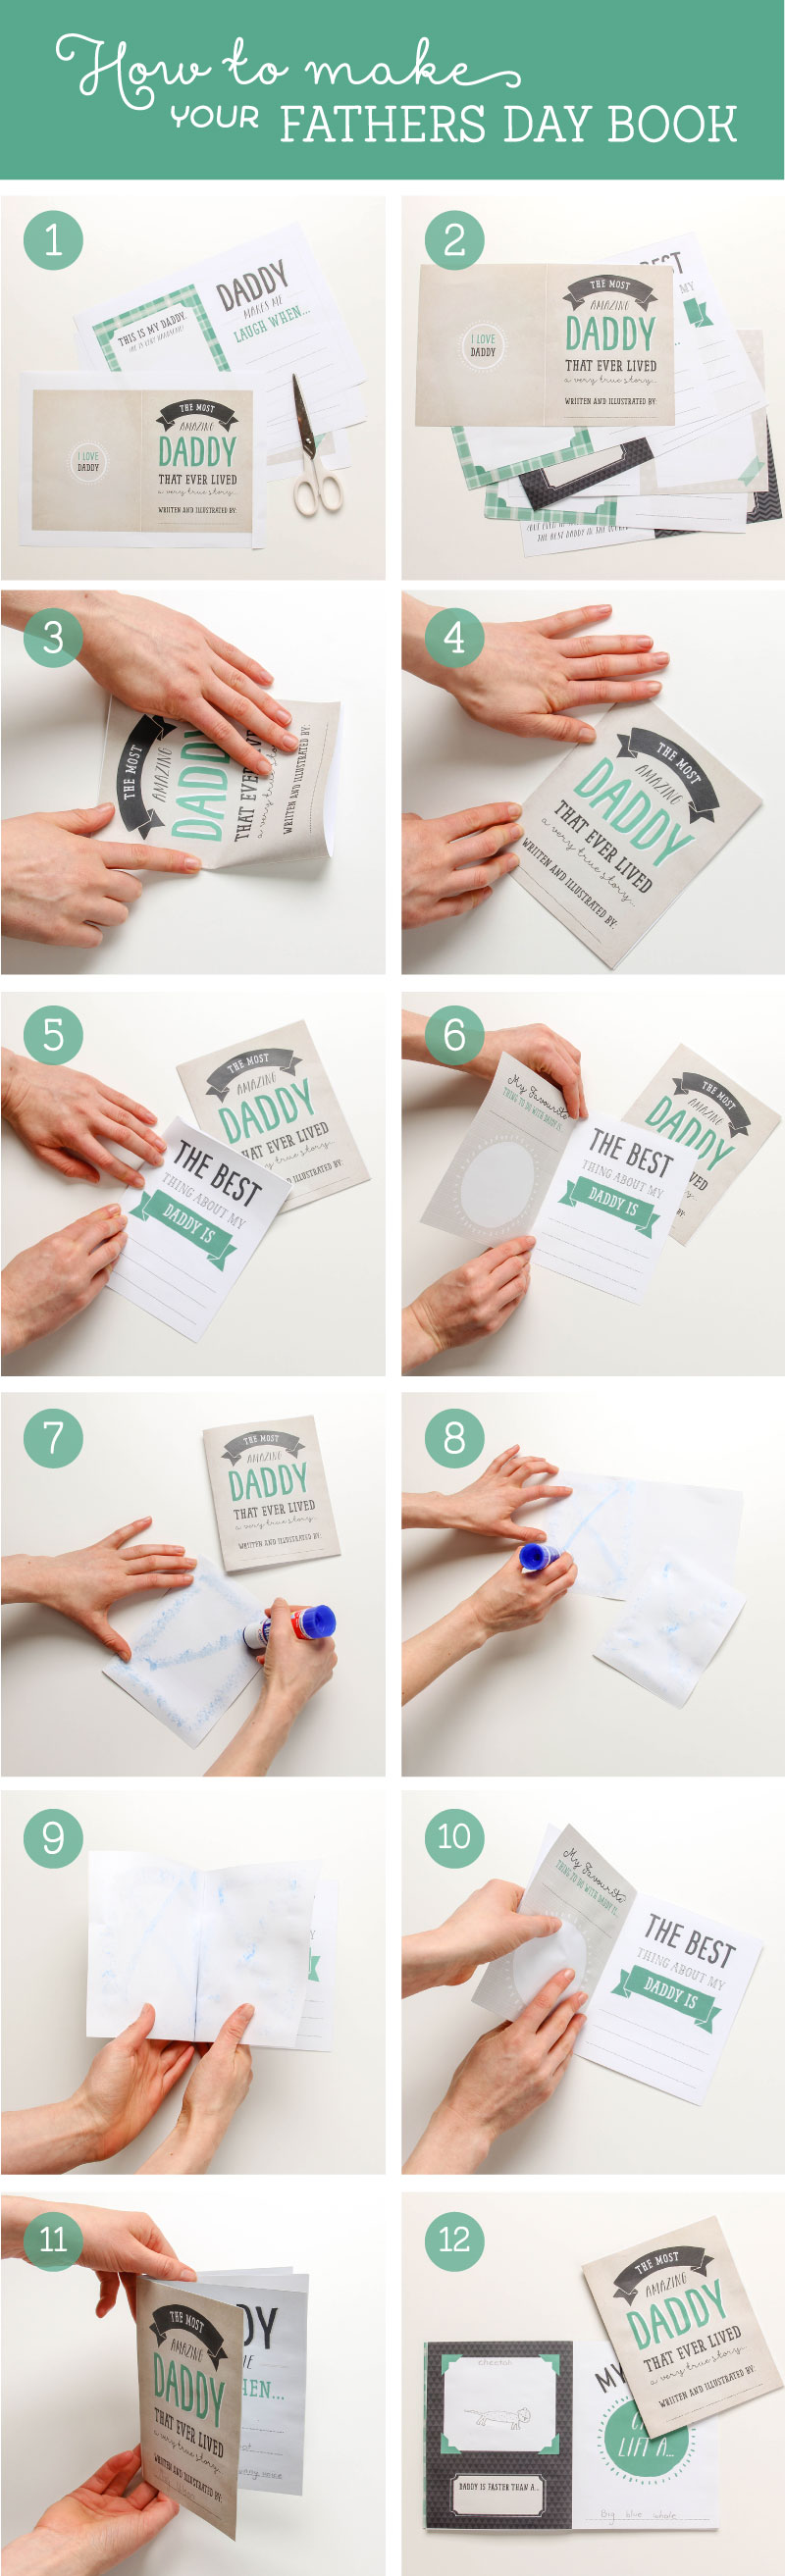 How to make your Free Fathers Day Printable Book | Tinyme Blog